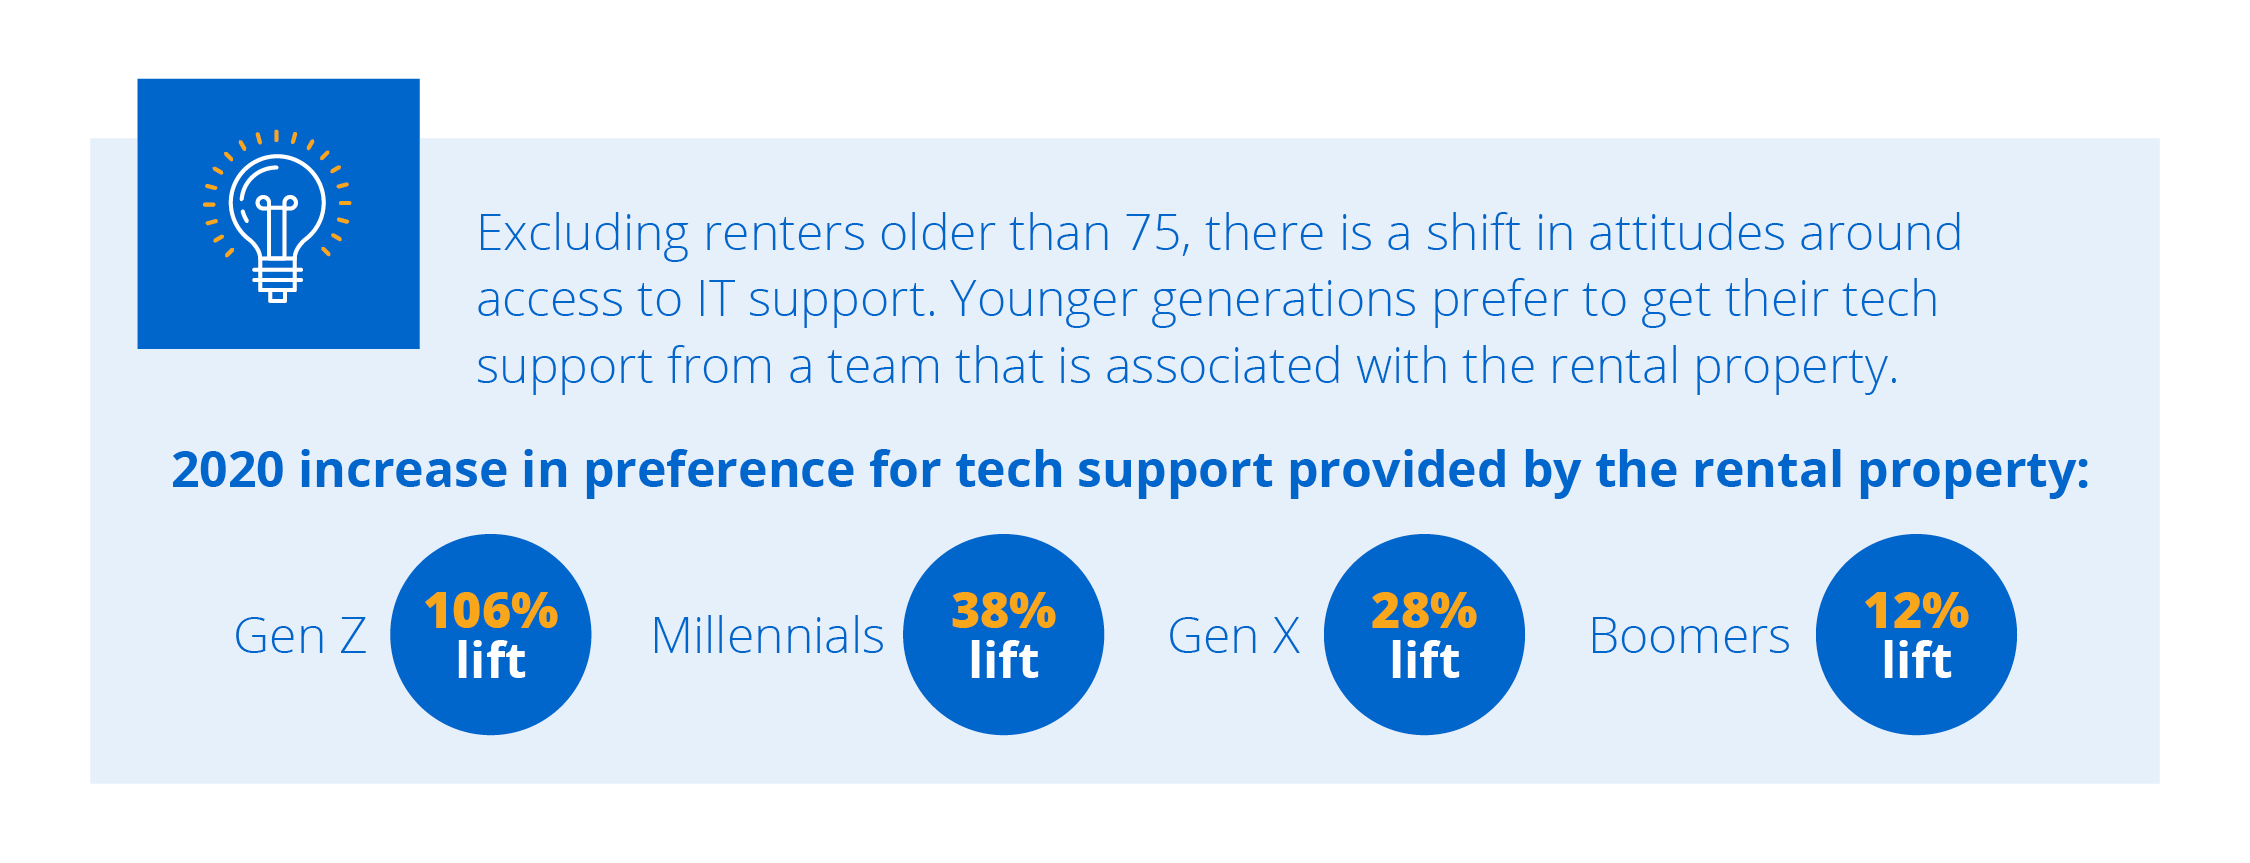 Younger generations prefer to get their tech support from the rental property